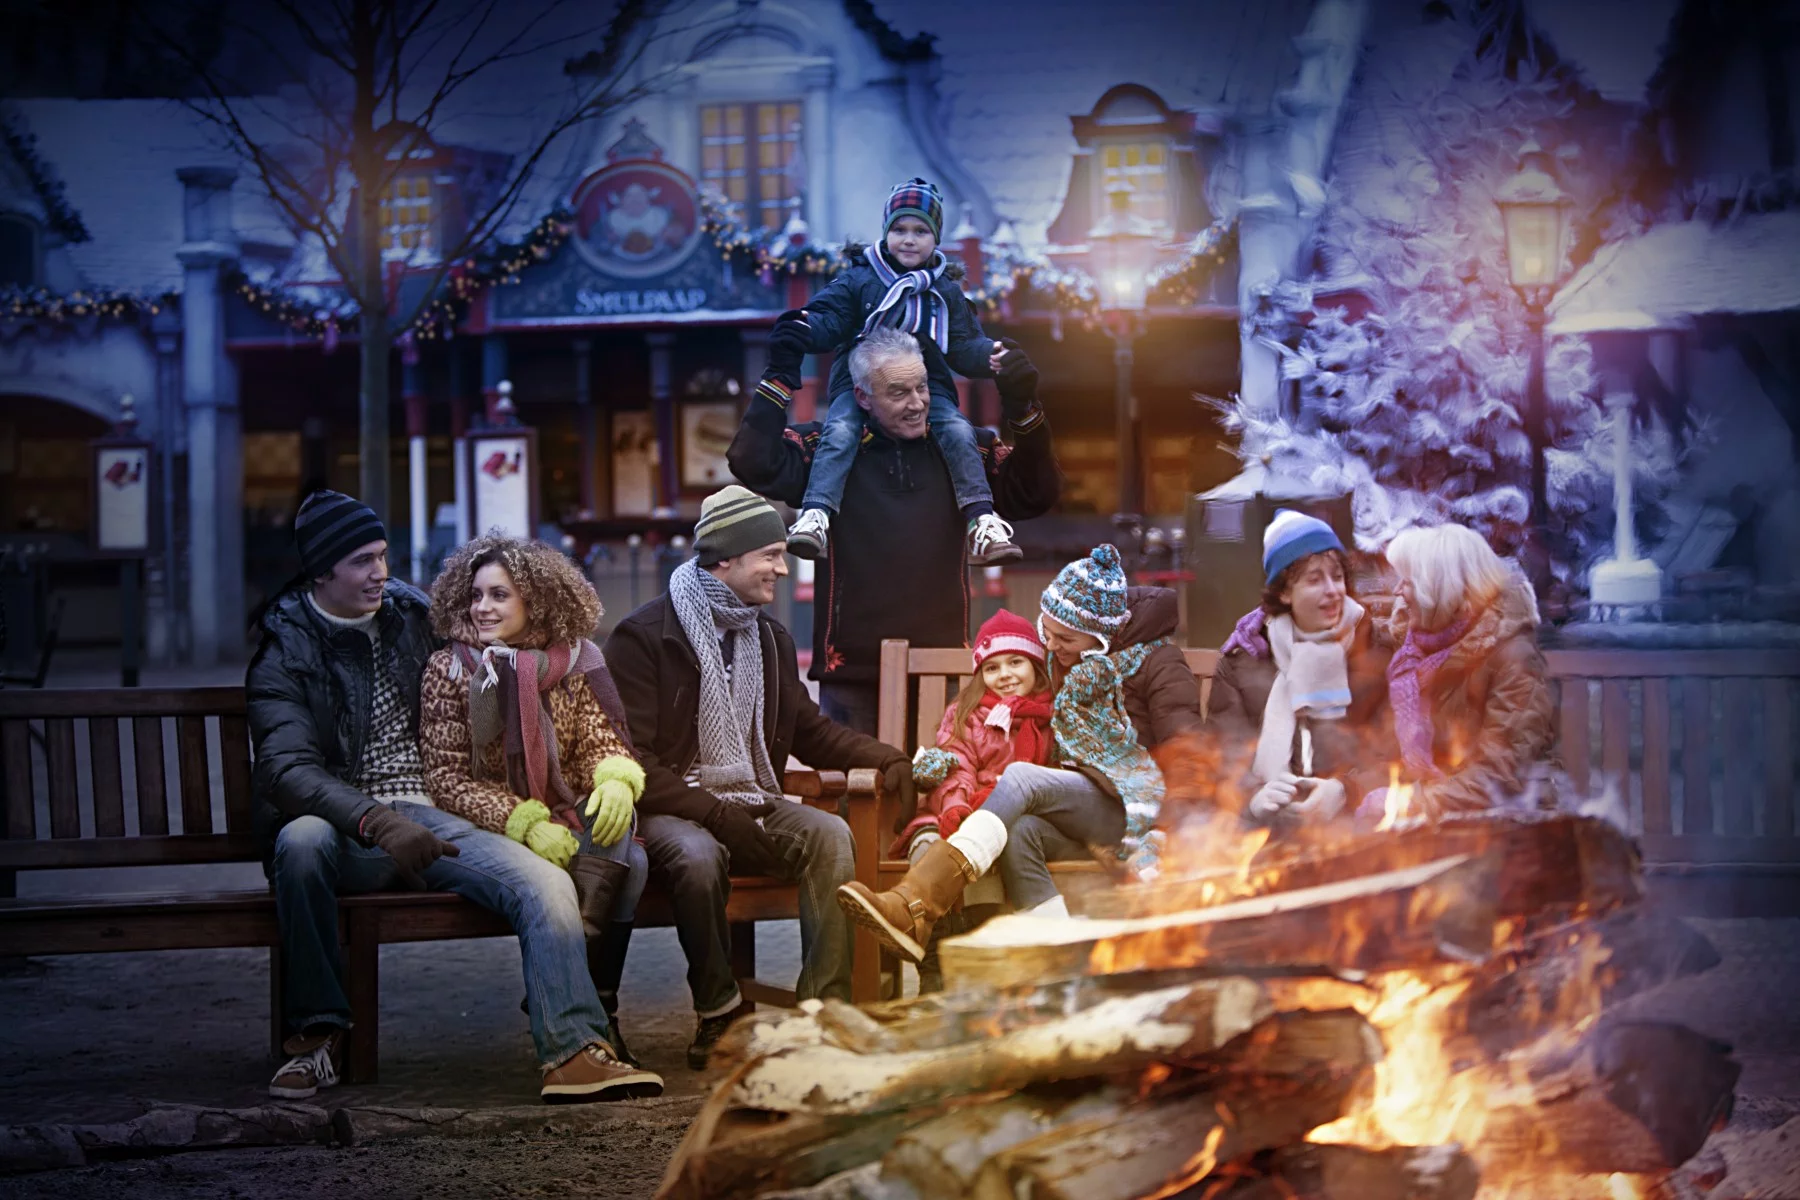 Winter events at the Efteling